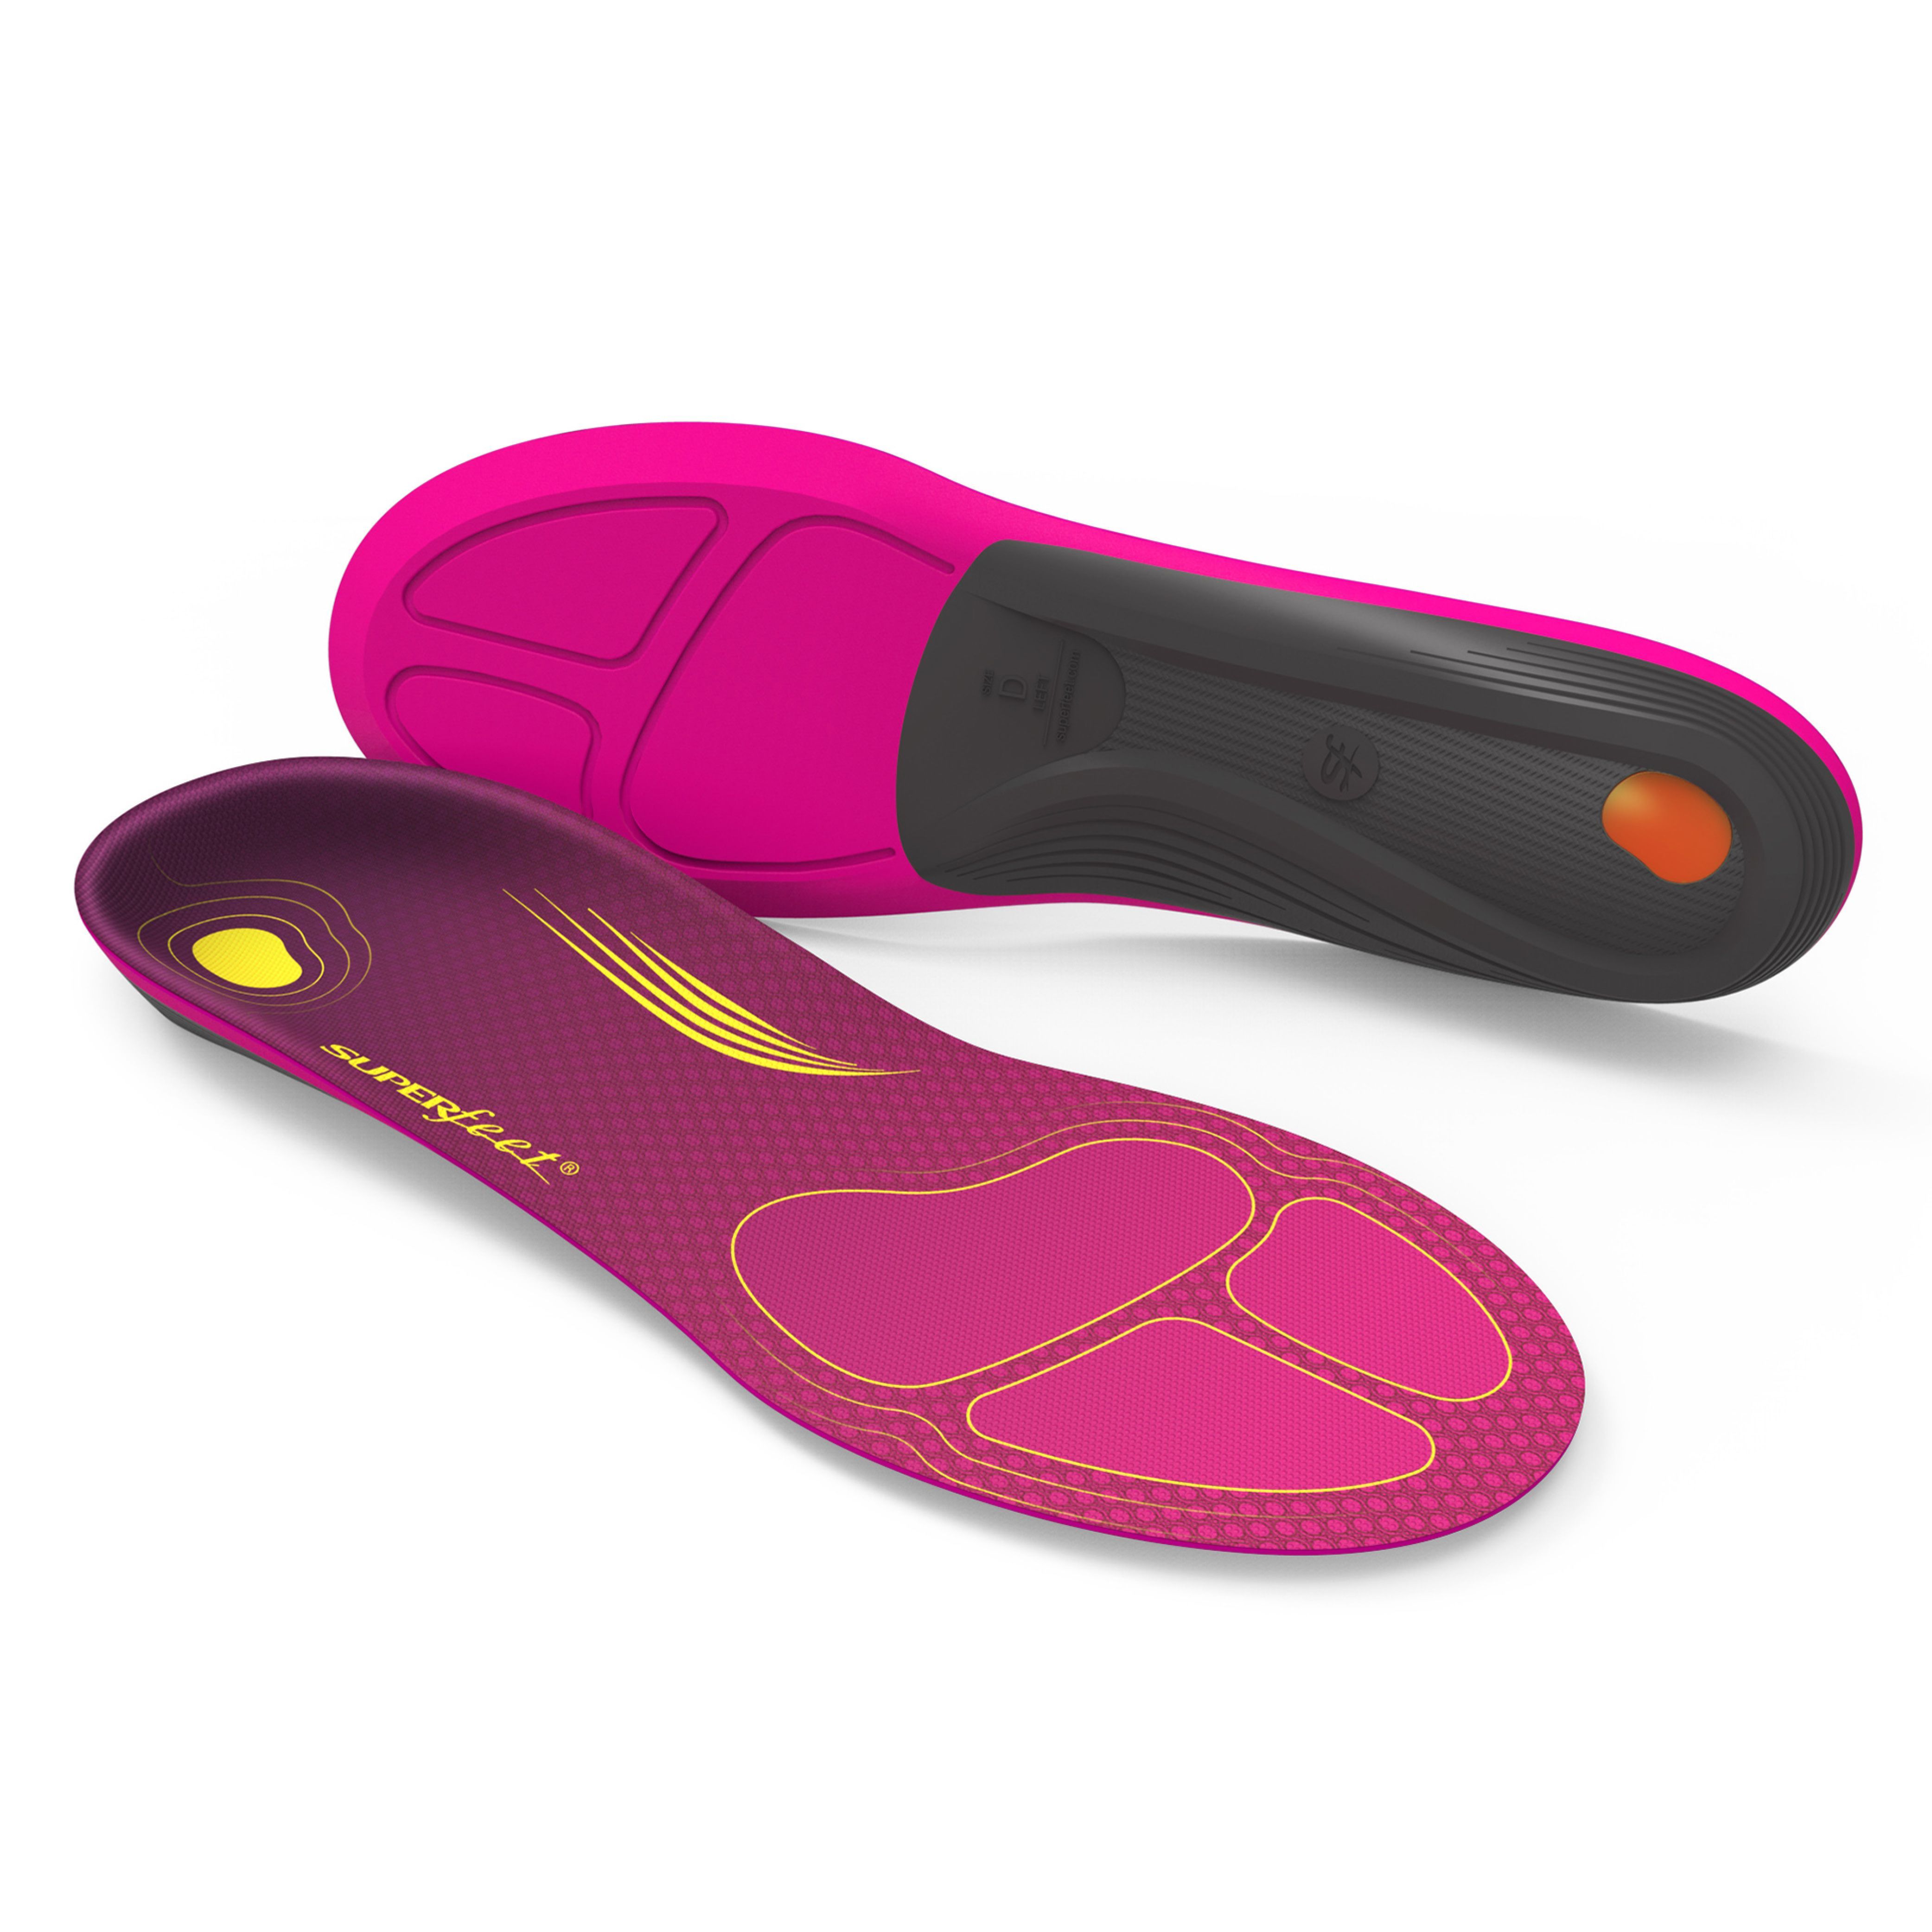 Spenco Polysorb Flow Cool Insole Insert Orthotic Women's 5-6 